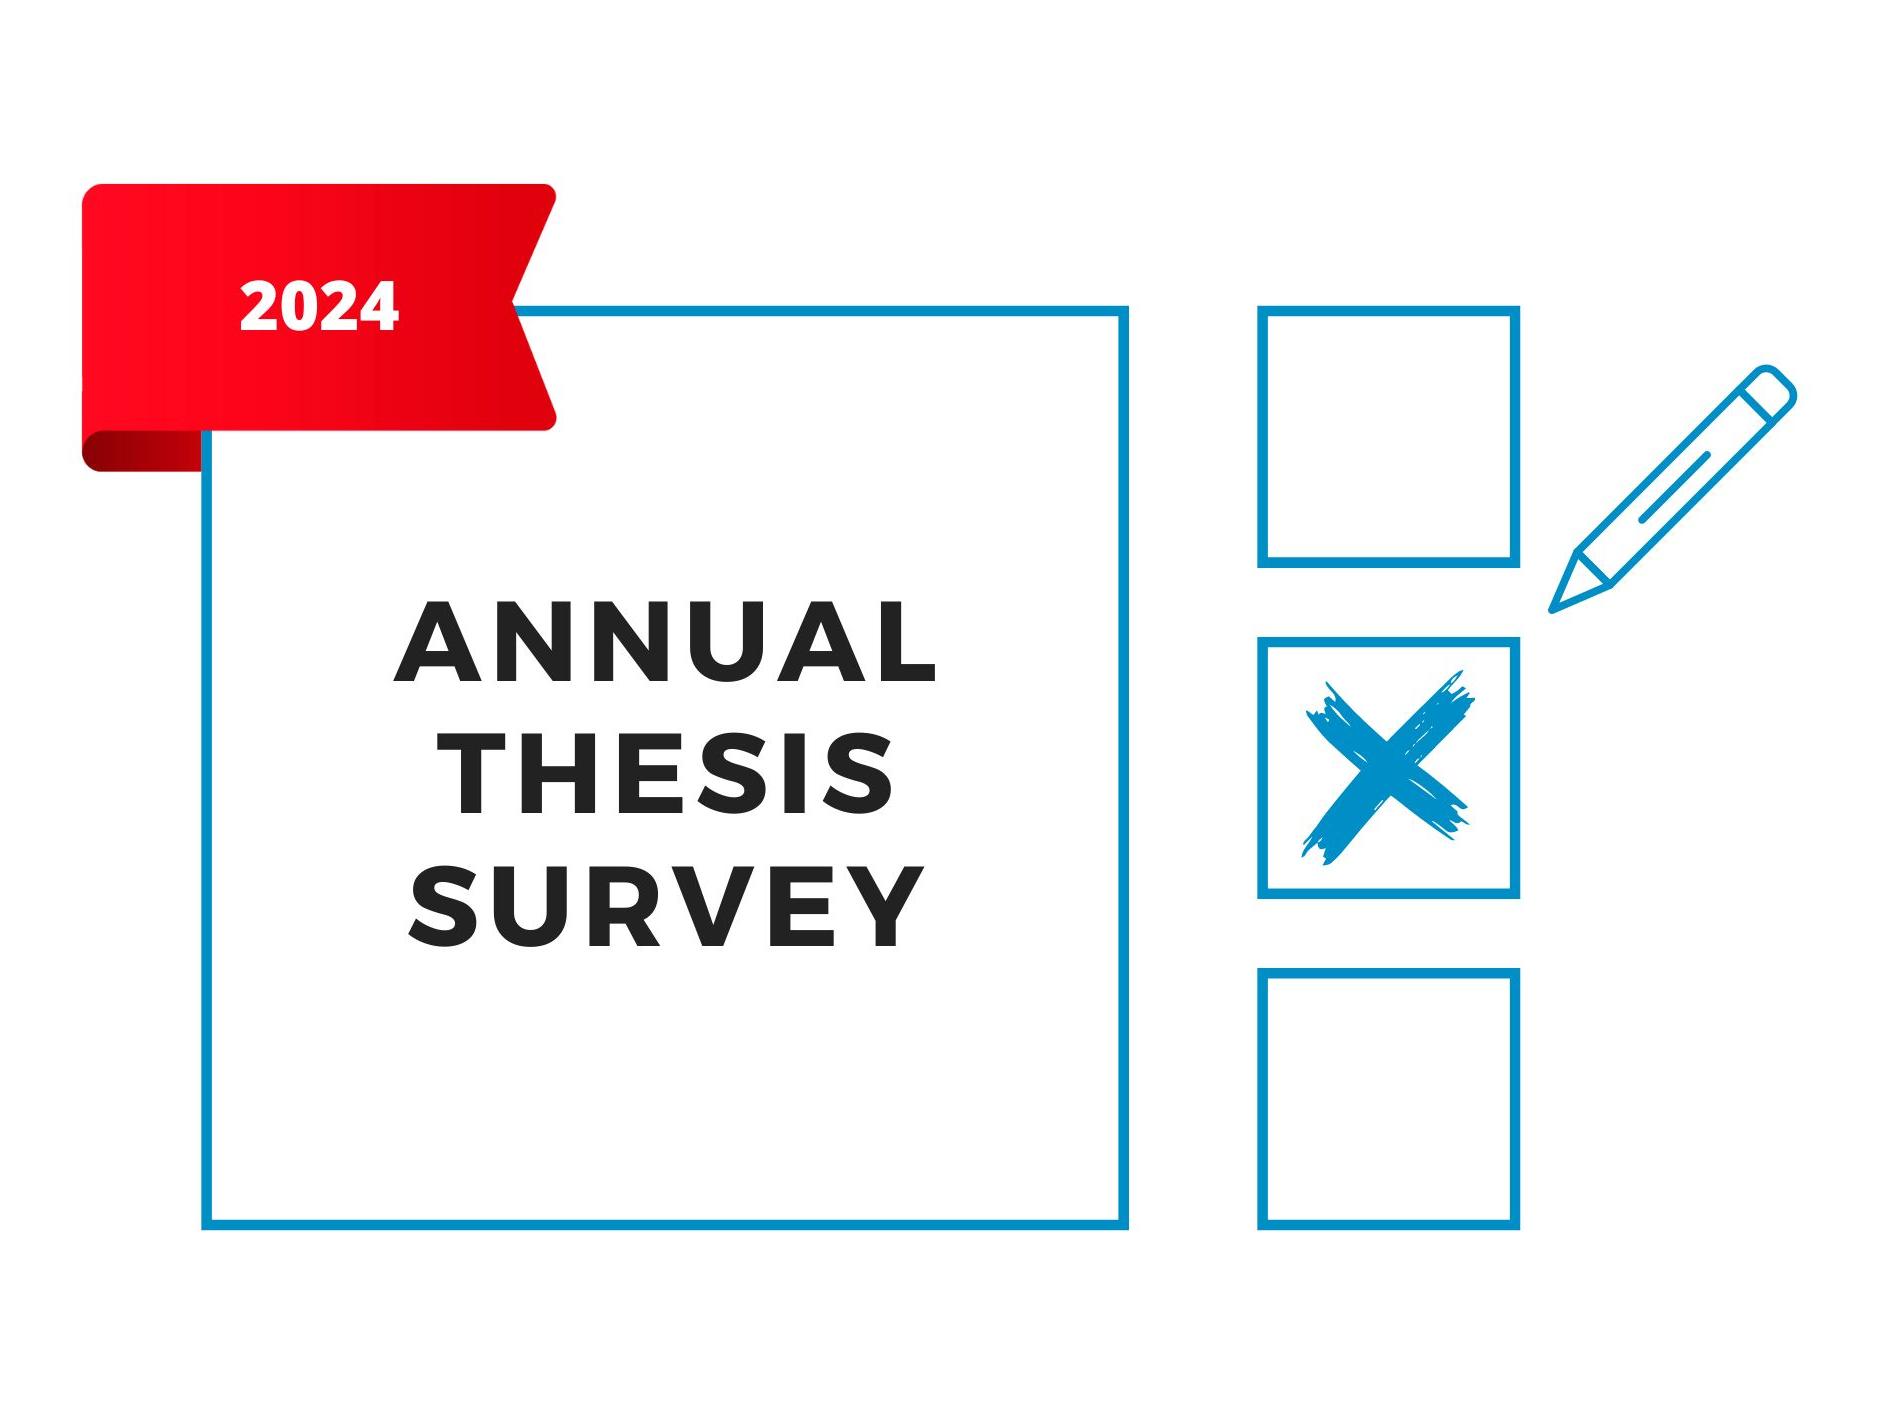 The Annual Thesis Survey 2024 is open!